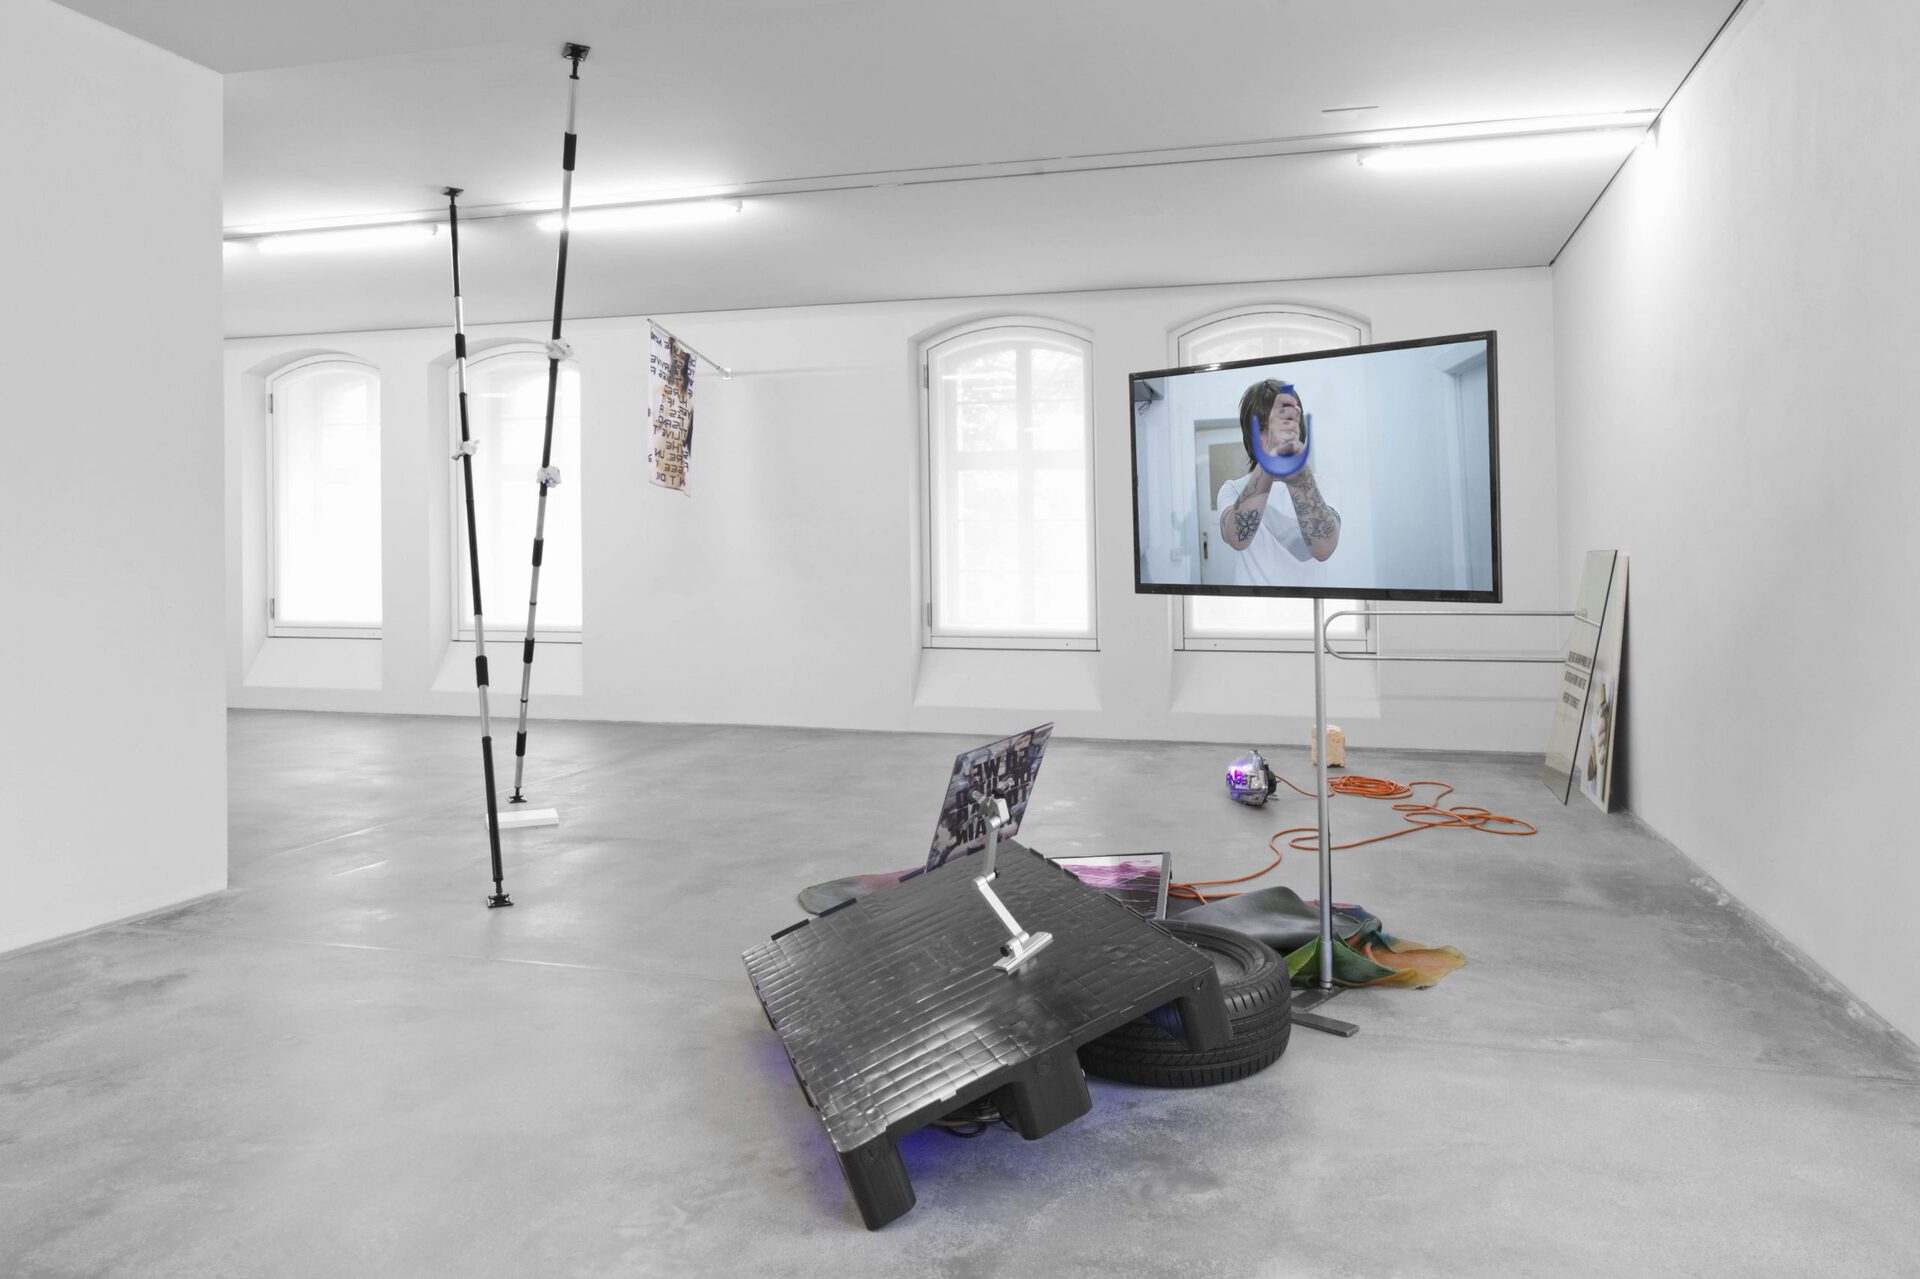 Law of Life, 2020, exhibition view, ZAK - Center for Contemporary Art, Berlin